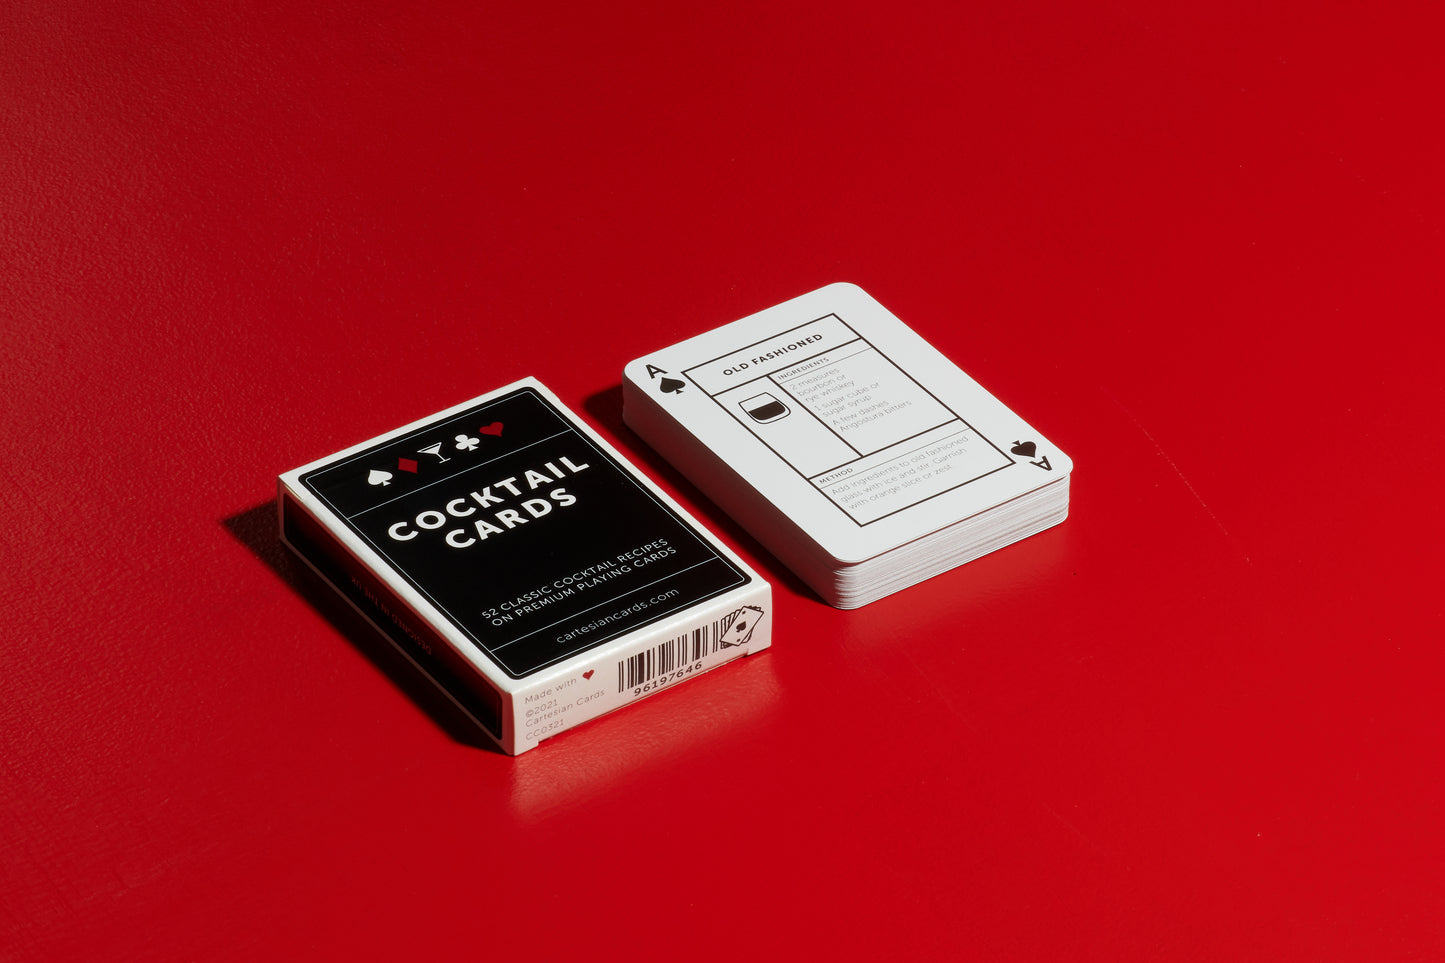 A deck of Cocktail Cards playing cards showing an Old Fashioned cocktail recipe